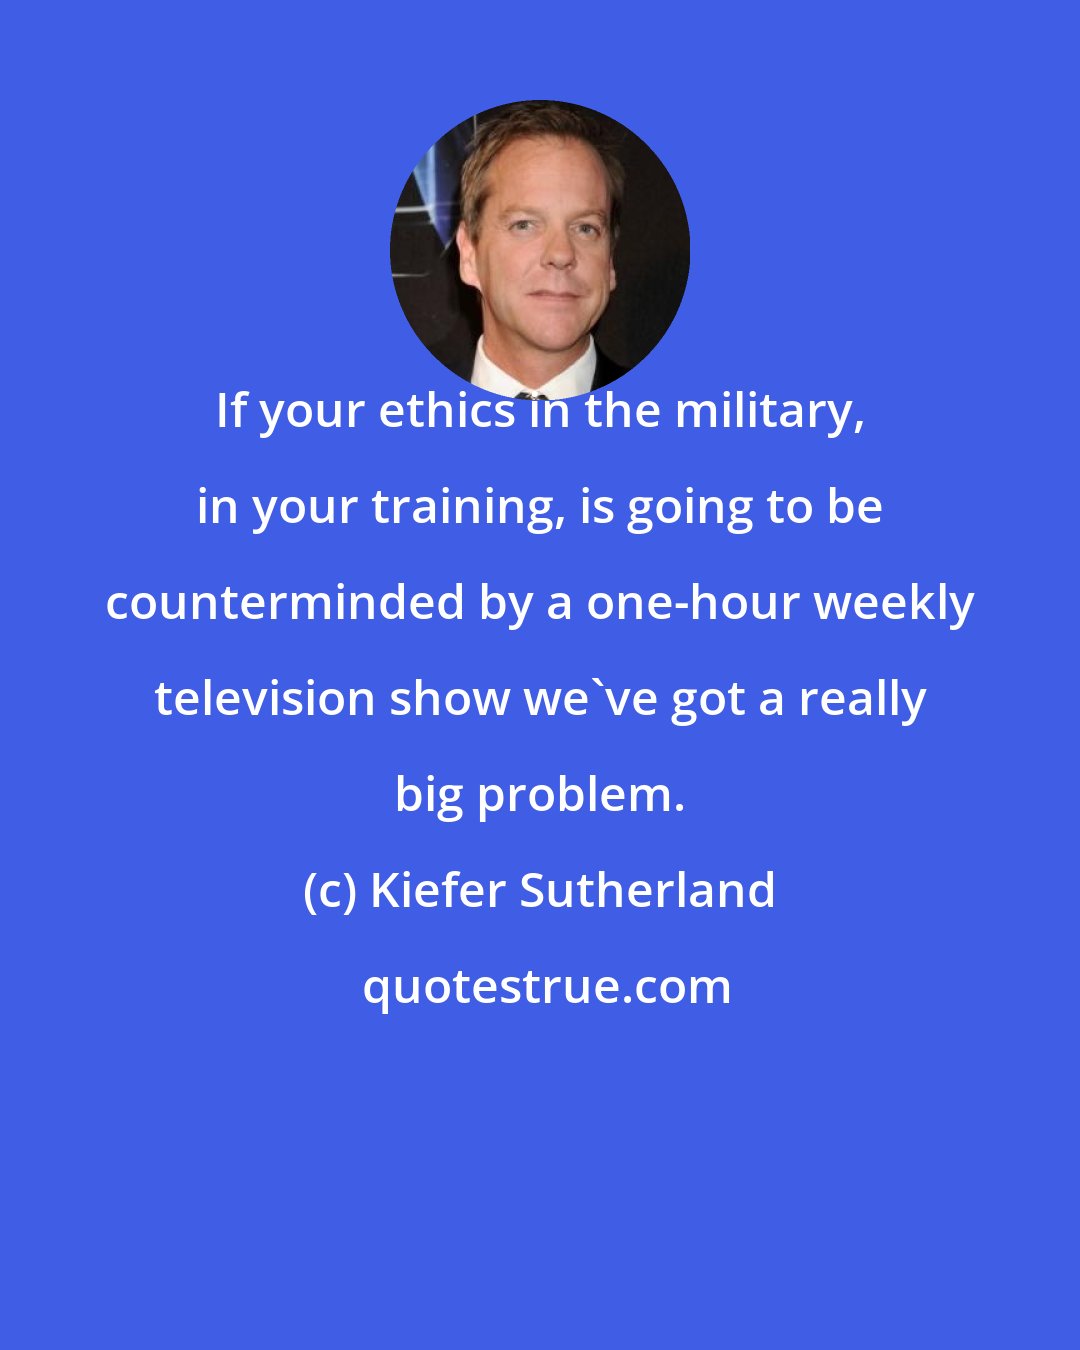 Kiefer Sutherland: If your ethics in the military, in your training, is going to be counterminded by a one-hour weekly television show we've got a really big problem.